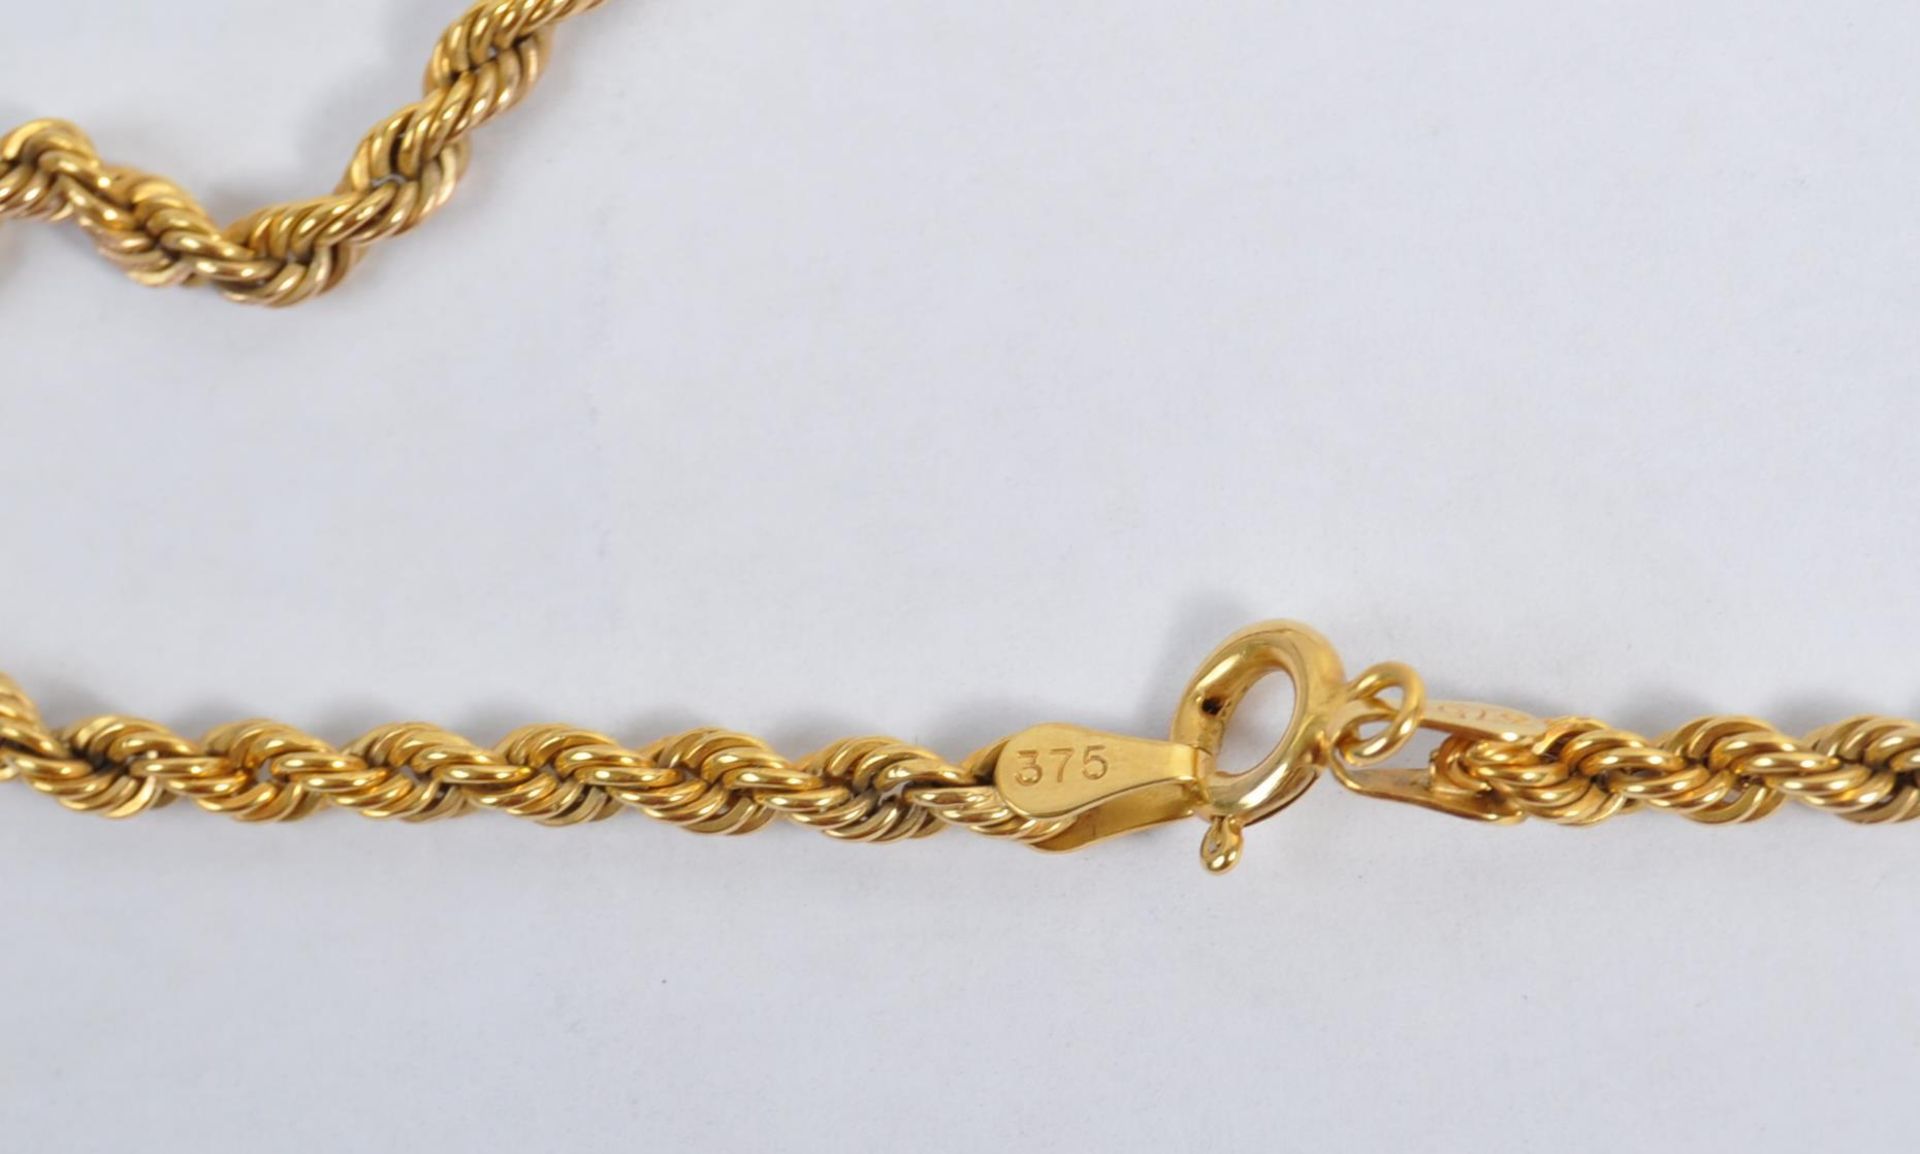 9CT GOLD ROPE TWIST CHAIN - Image 5 of 5